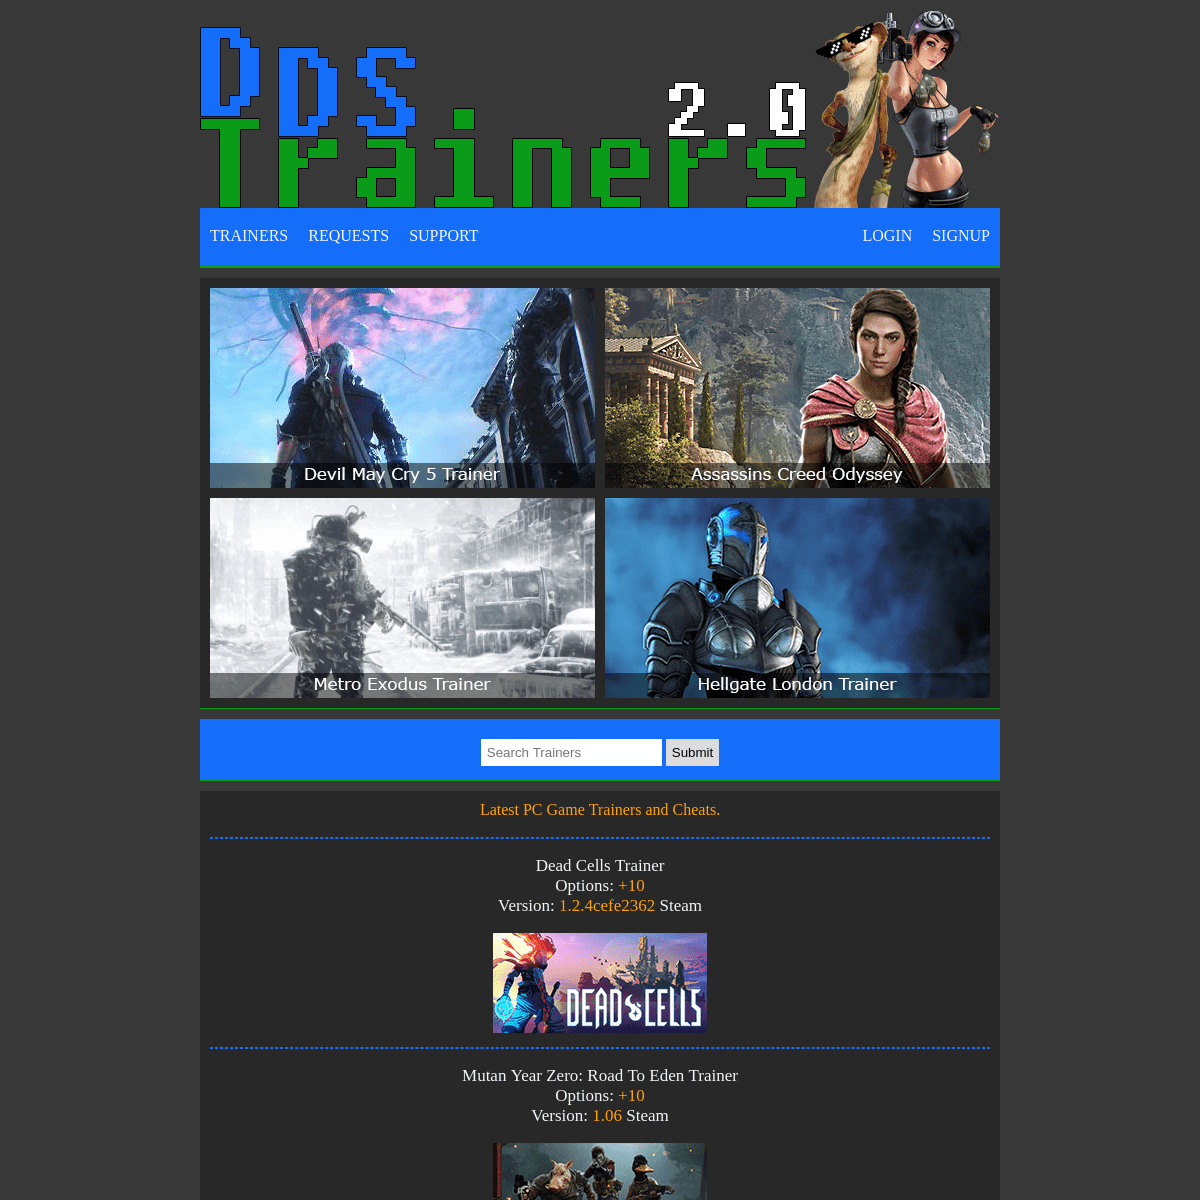 DDSTrainers - Cheats, Codes, Trainers. The best PC Game Trainers on the NET! - DDSTrainers